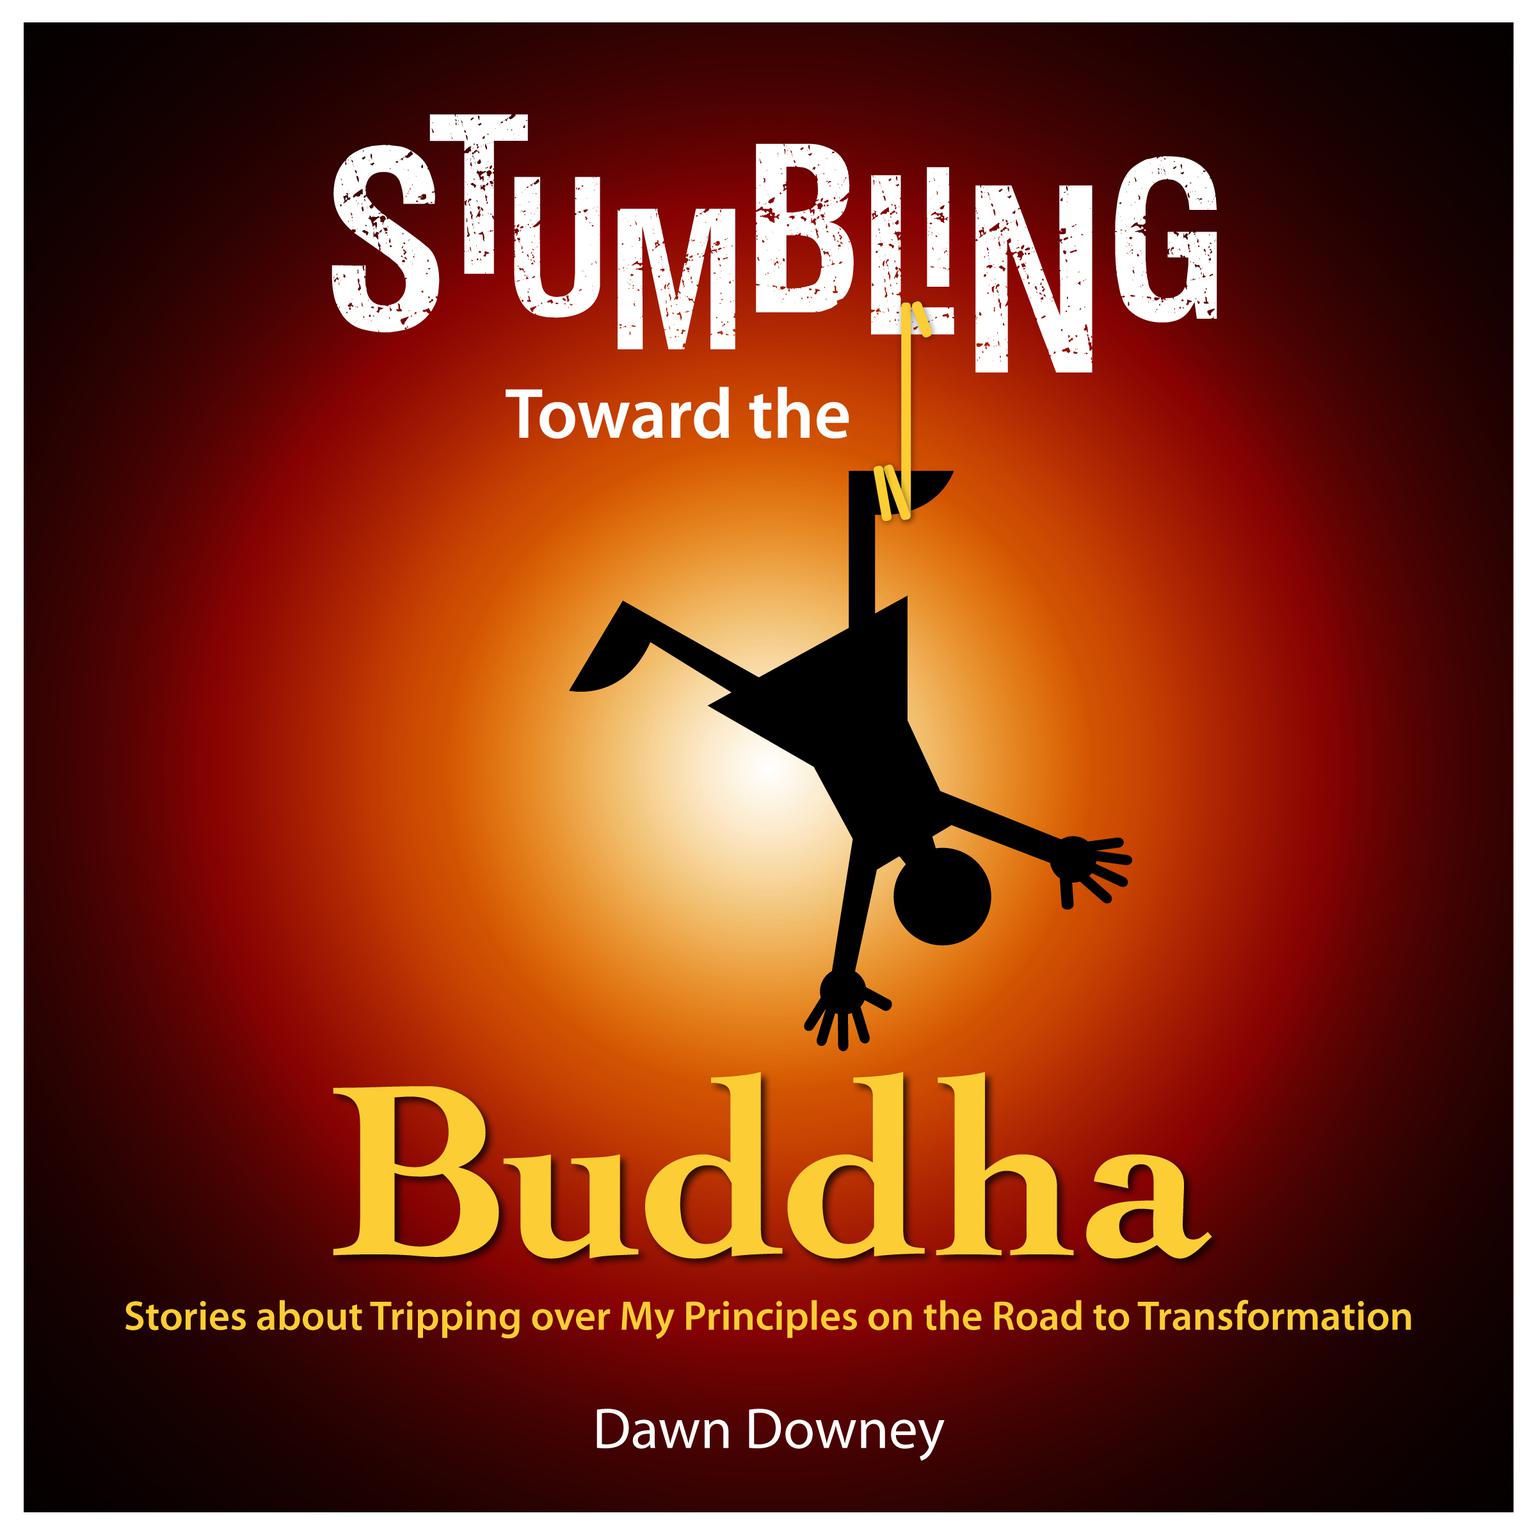 Stumbling toward the Buddha: Stories about Tripping over My Principles on the Road to Transformation Audiobook, by Dawn Downey